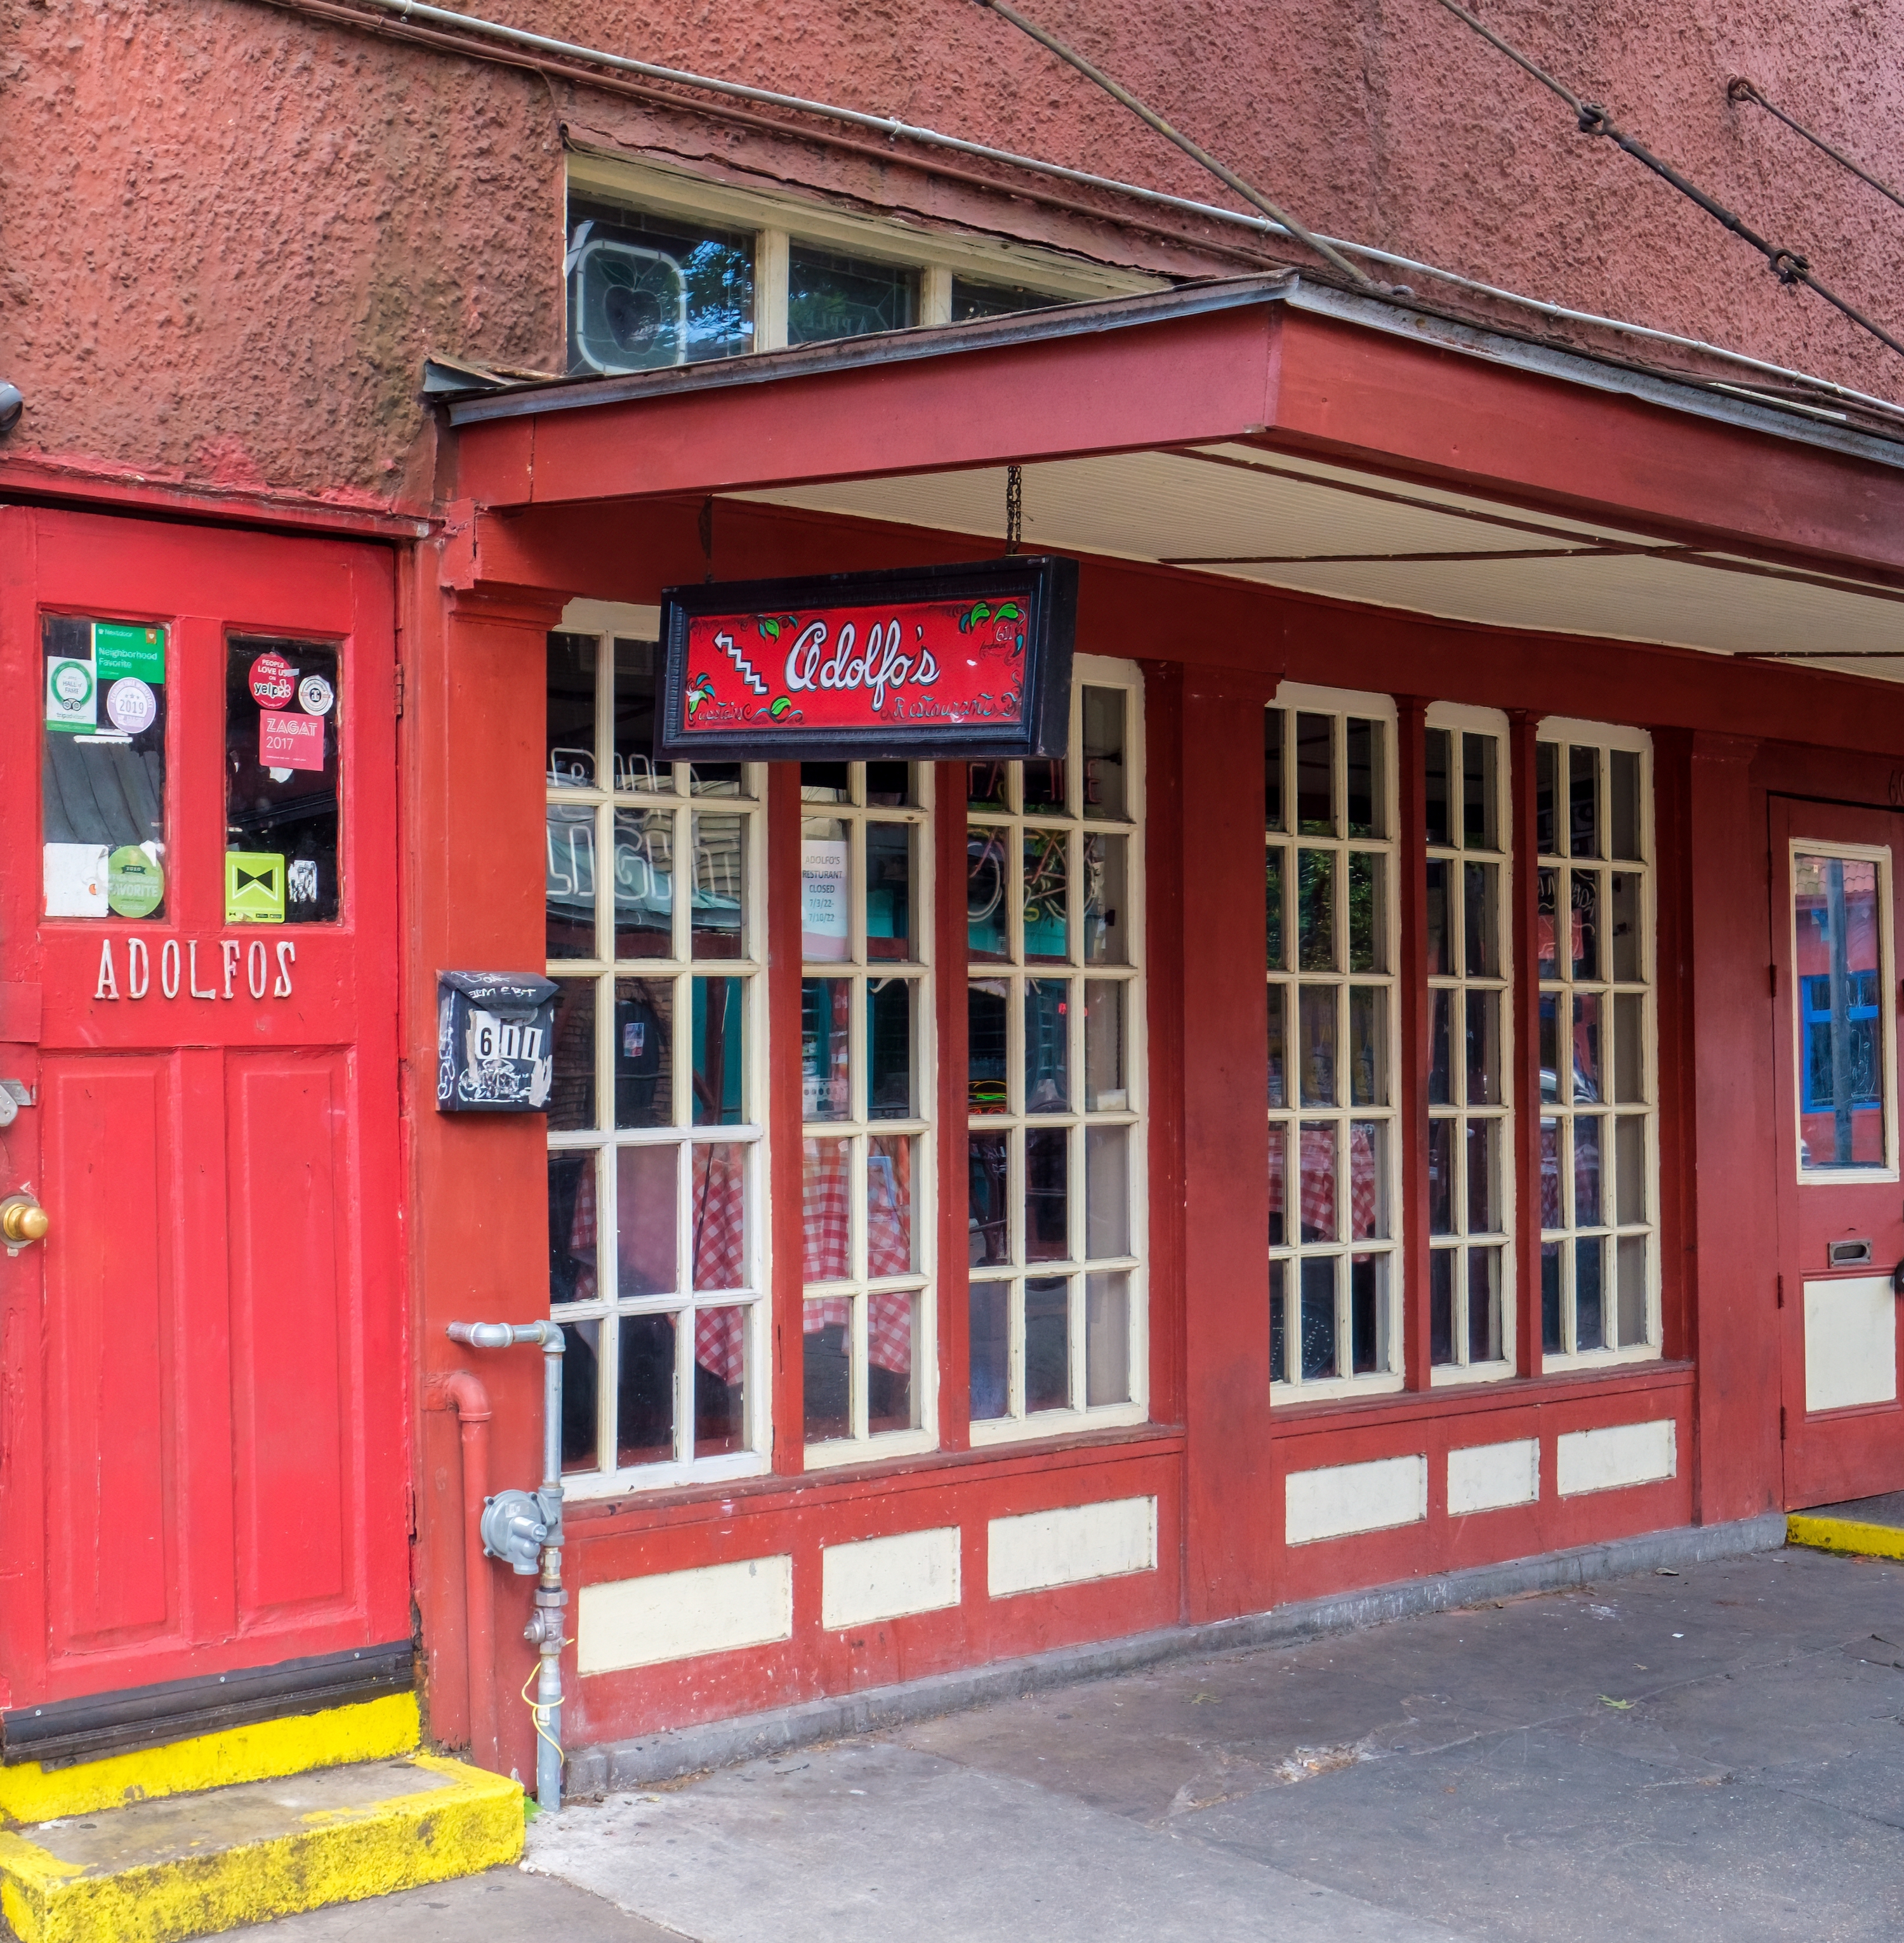 The outside facade of Adolfo’s Restaurant on Frenchmen Street in New Orleans’s Marigny neighborhood including a red door and awning.